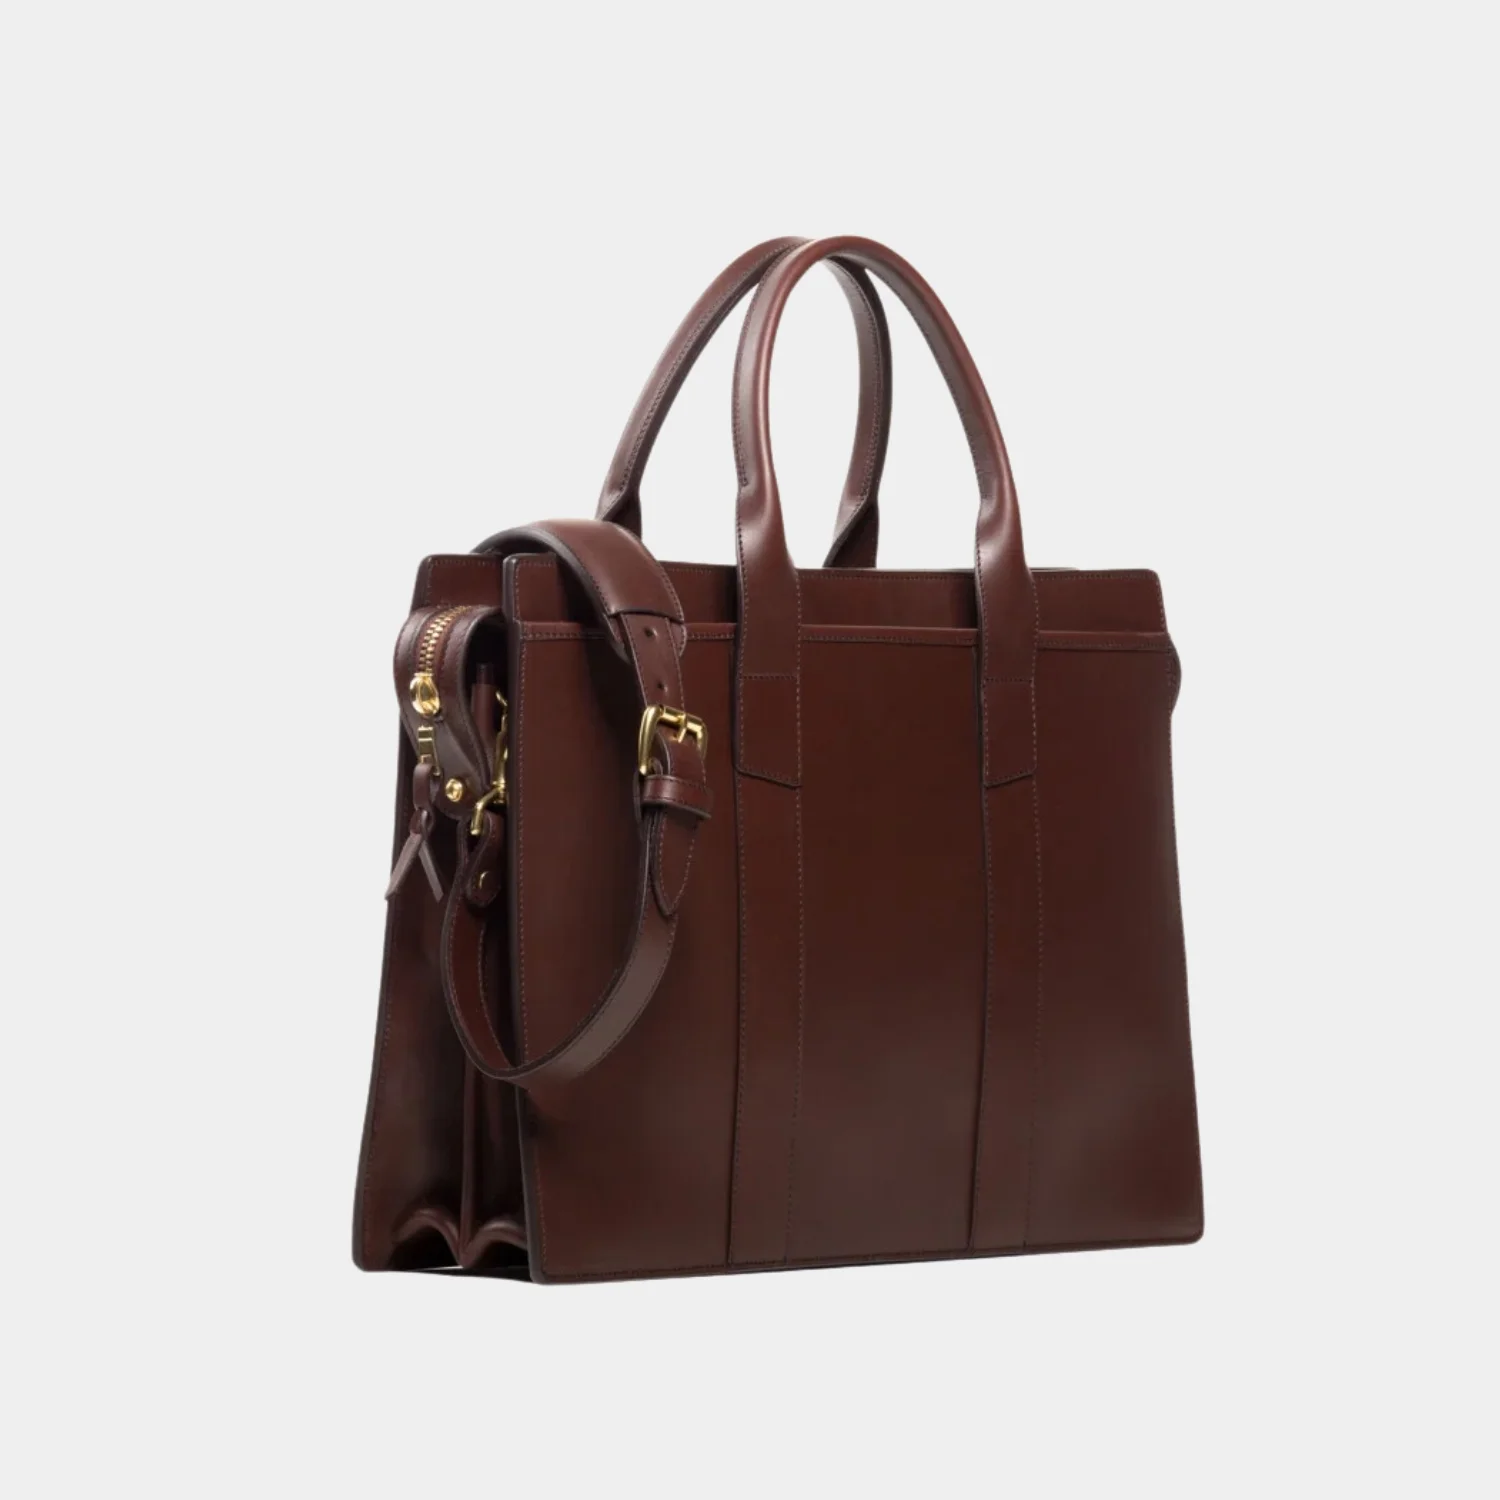 American Style Classy Chocolate Bown Leather Laptop Briefcase Bag Side Detail